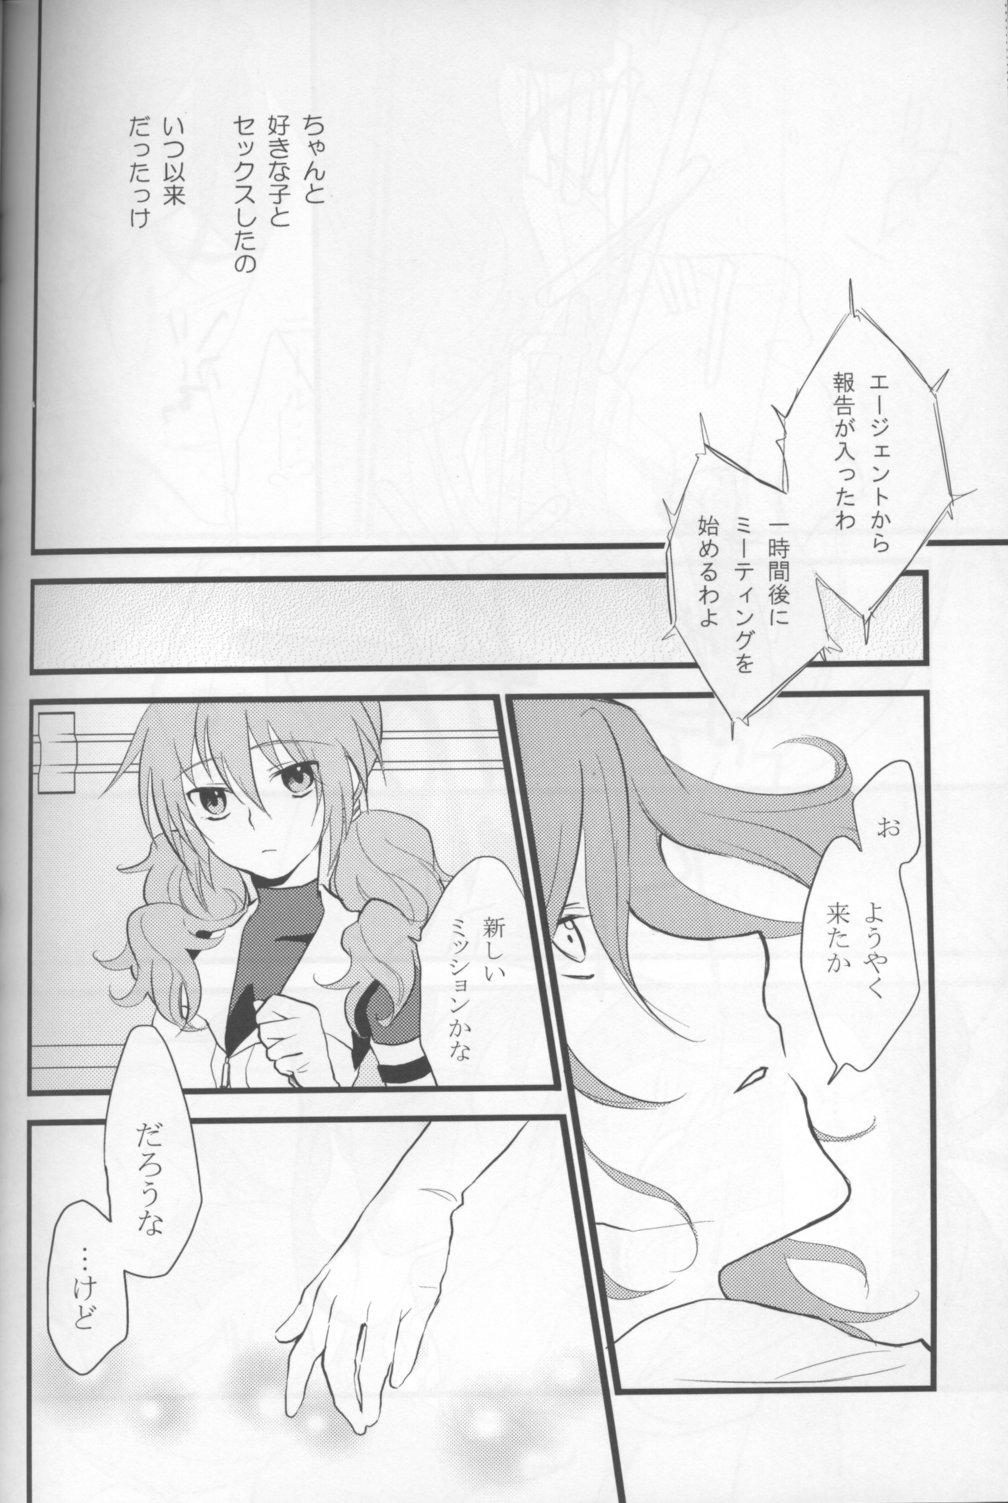 Gayfuck Touch Me - Gundam 00 Behind - Page 47